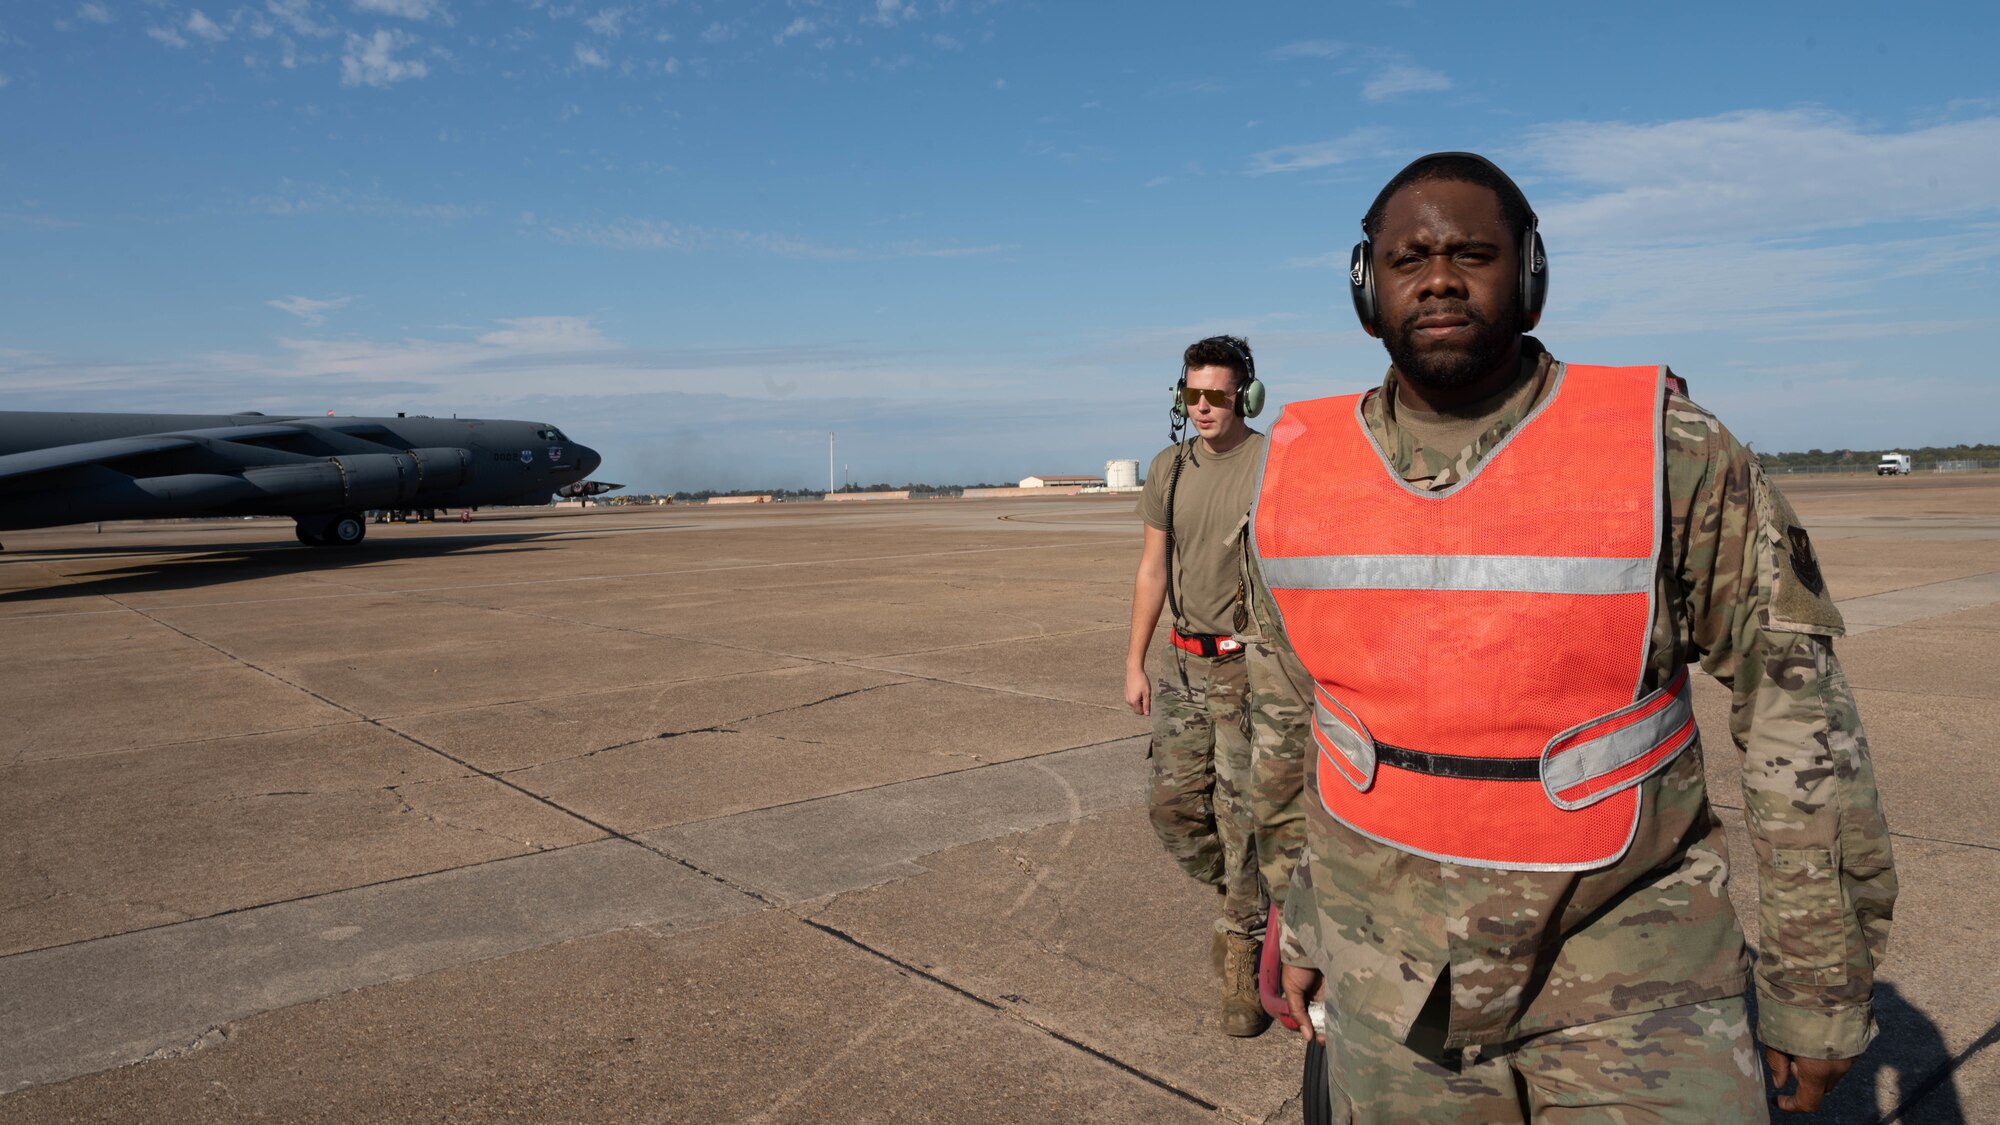 Senior Airman Joe Dorsey and Airman 1st Class Noah Maurer, both 2nd Aircraft Maintenance Squadron crew chiefs, haul equipment off the flightline after completing pre-flight checks on a B-52 Stratofortress during Global Thunder 22 at Barksdale Air Force Base, Louisiana, Nov. 2, 2021.